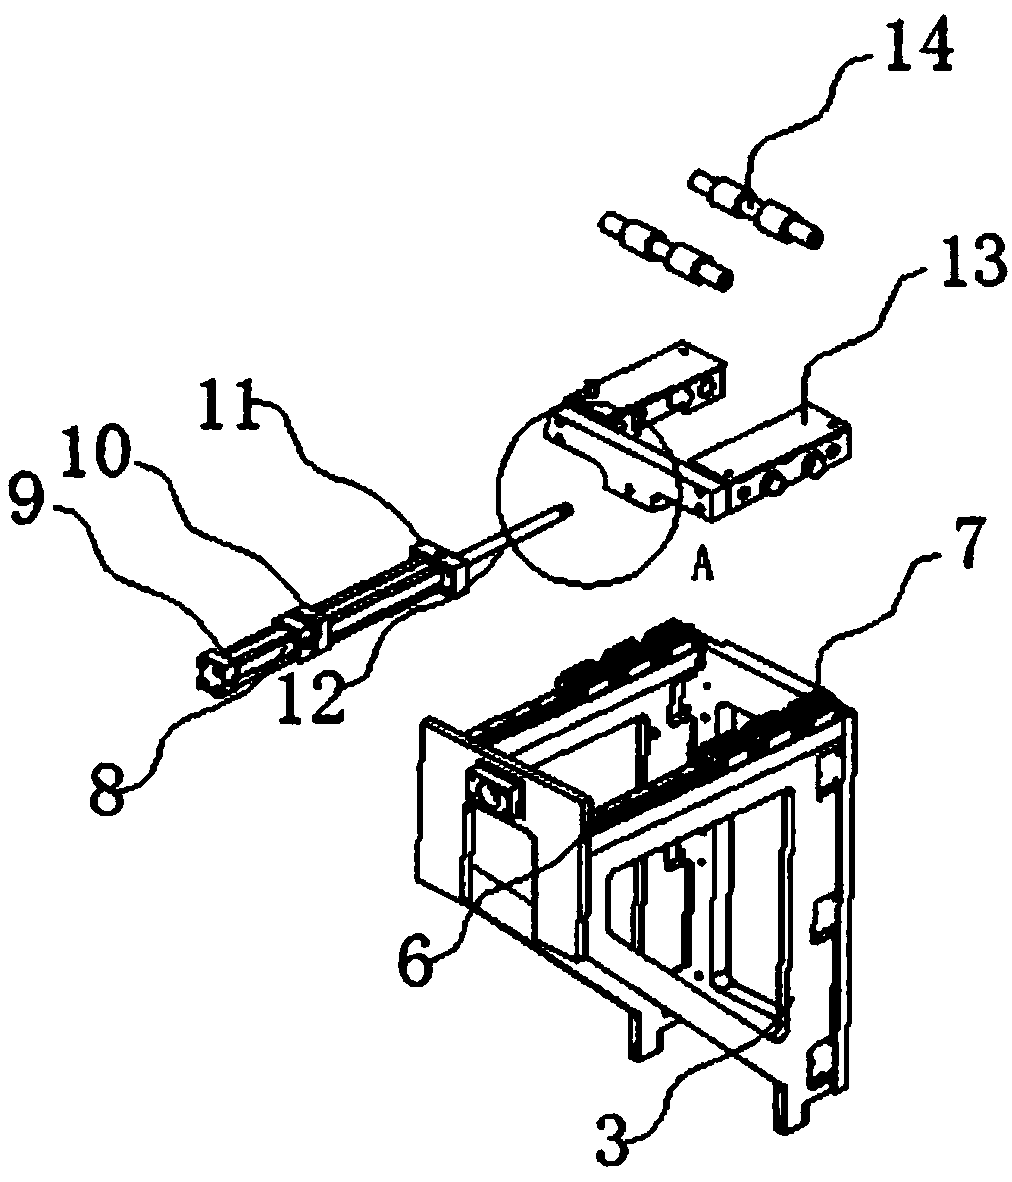 Pushing and flattening device for inlaying arbor wheel of light lifting machine